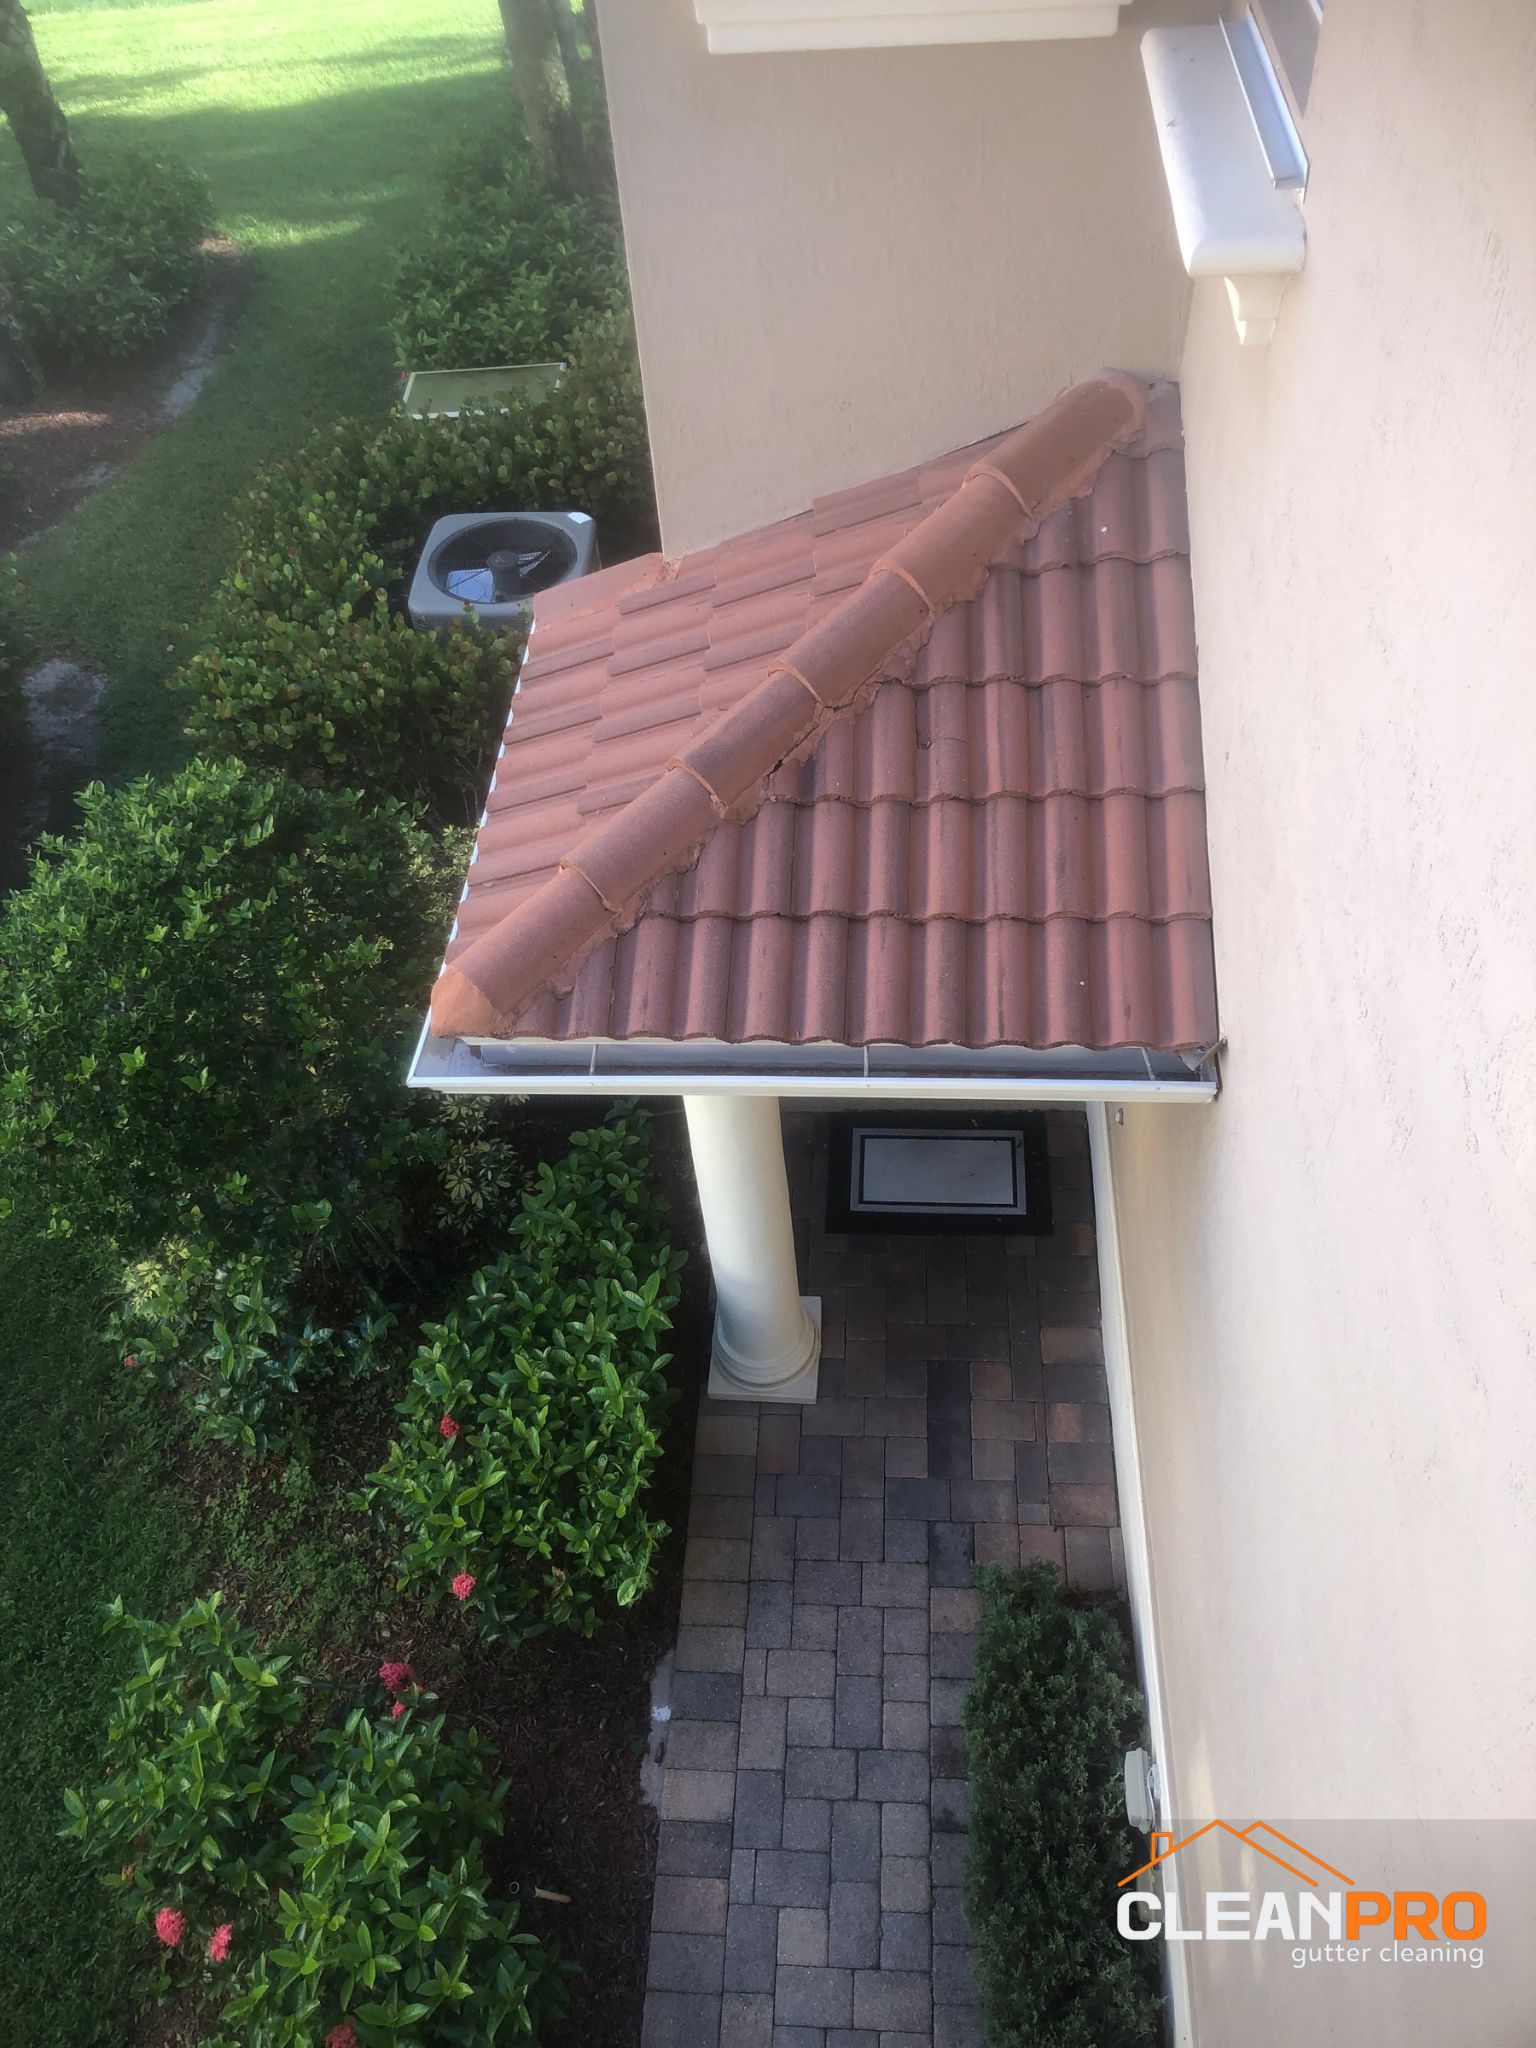 Local Gutter Cleaning in Naples